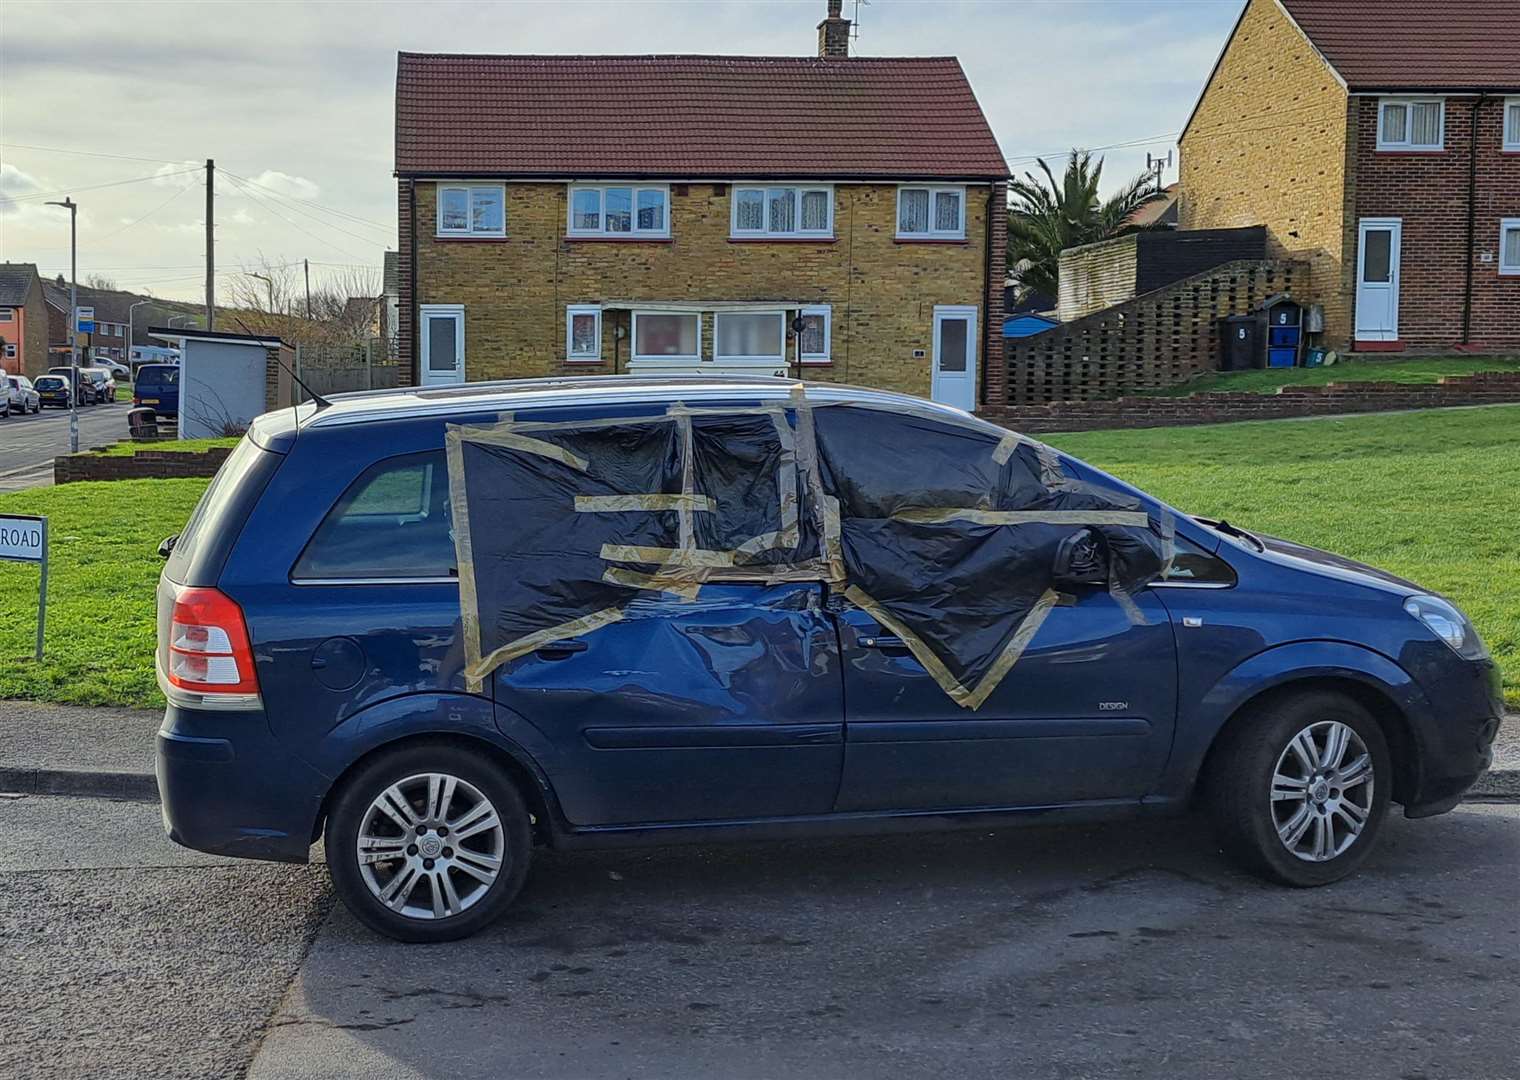 Maria Stoake's smashed car in Aycliffe, near Dover